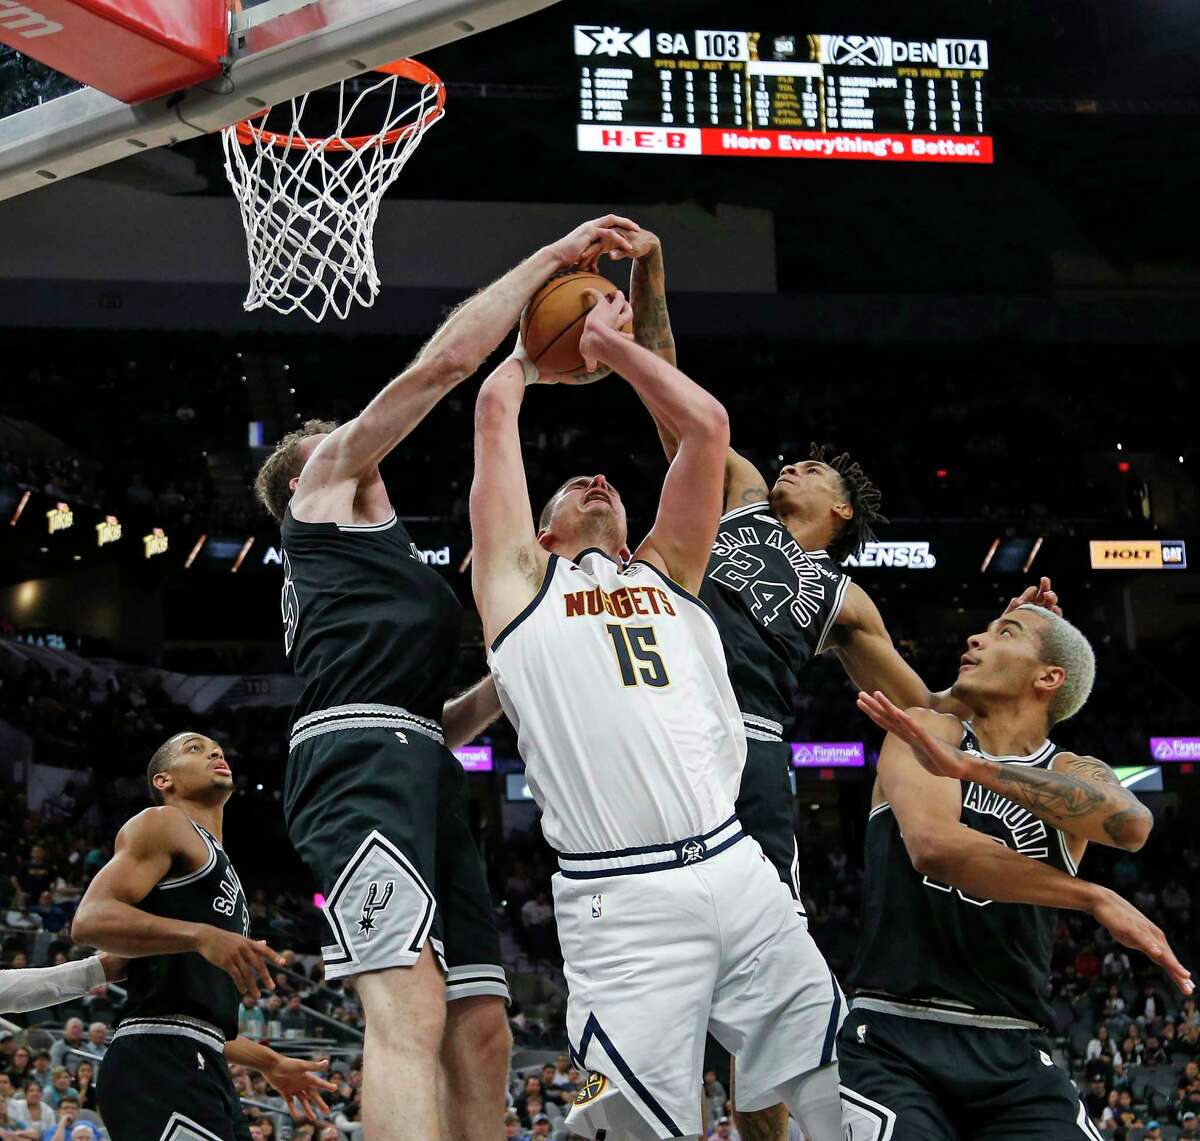 San Antonio Spurs Jakob Poeltl (25) combines with Devin Vassell (24) to tie up Denver Nuggets Nikola Jokic (15) in the second half on Monday, Nov. 7, 2022 at AT&T Center. Denver Nuggets defeated San Antonio Spurs 115-109.